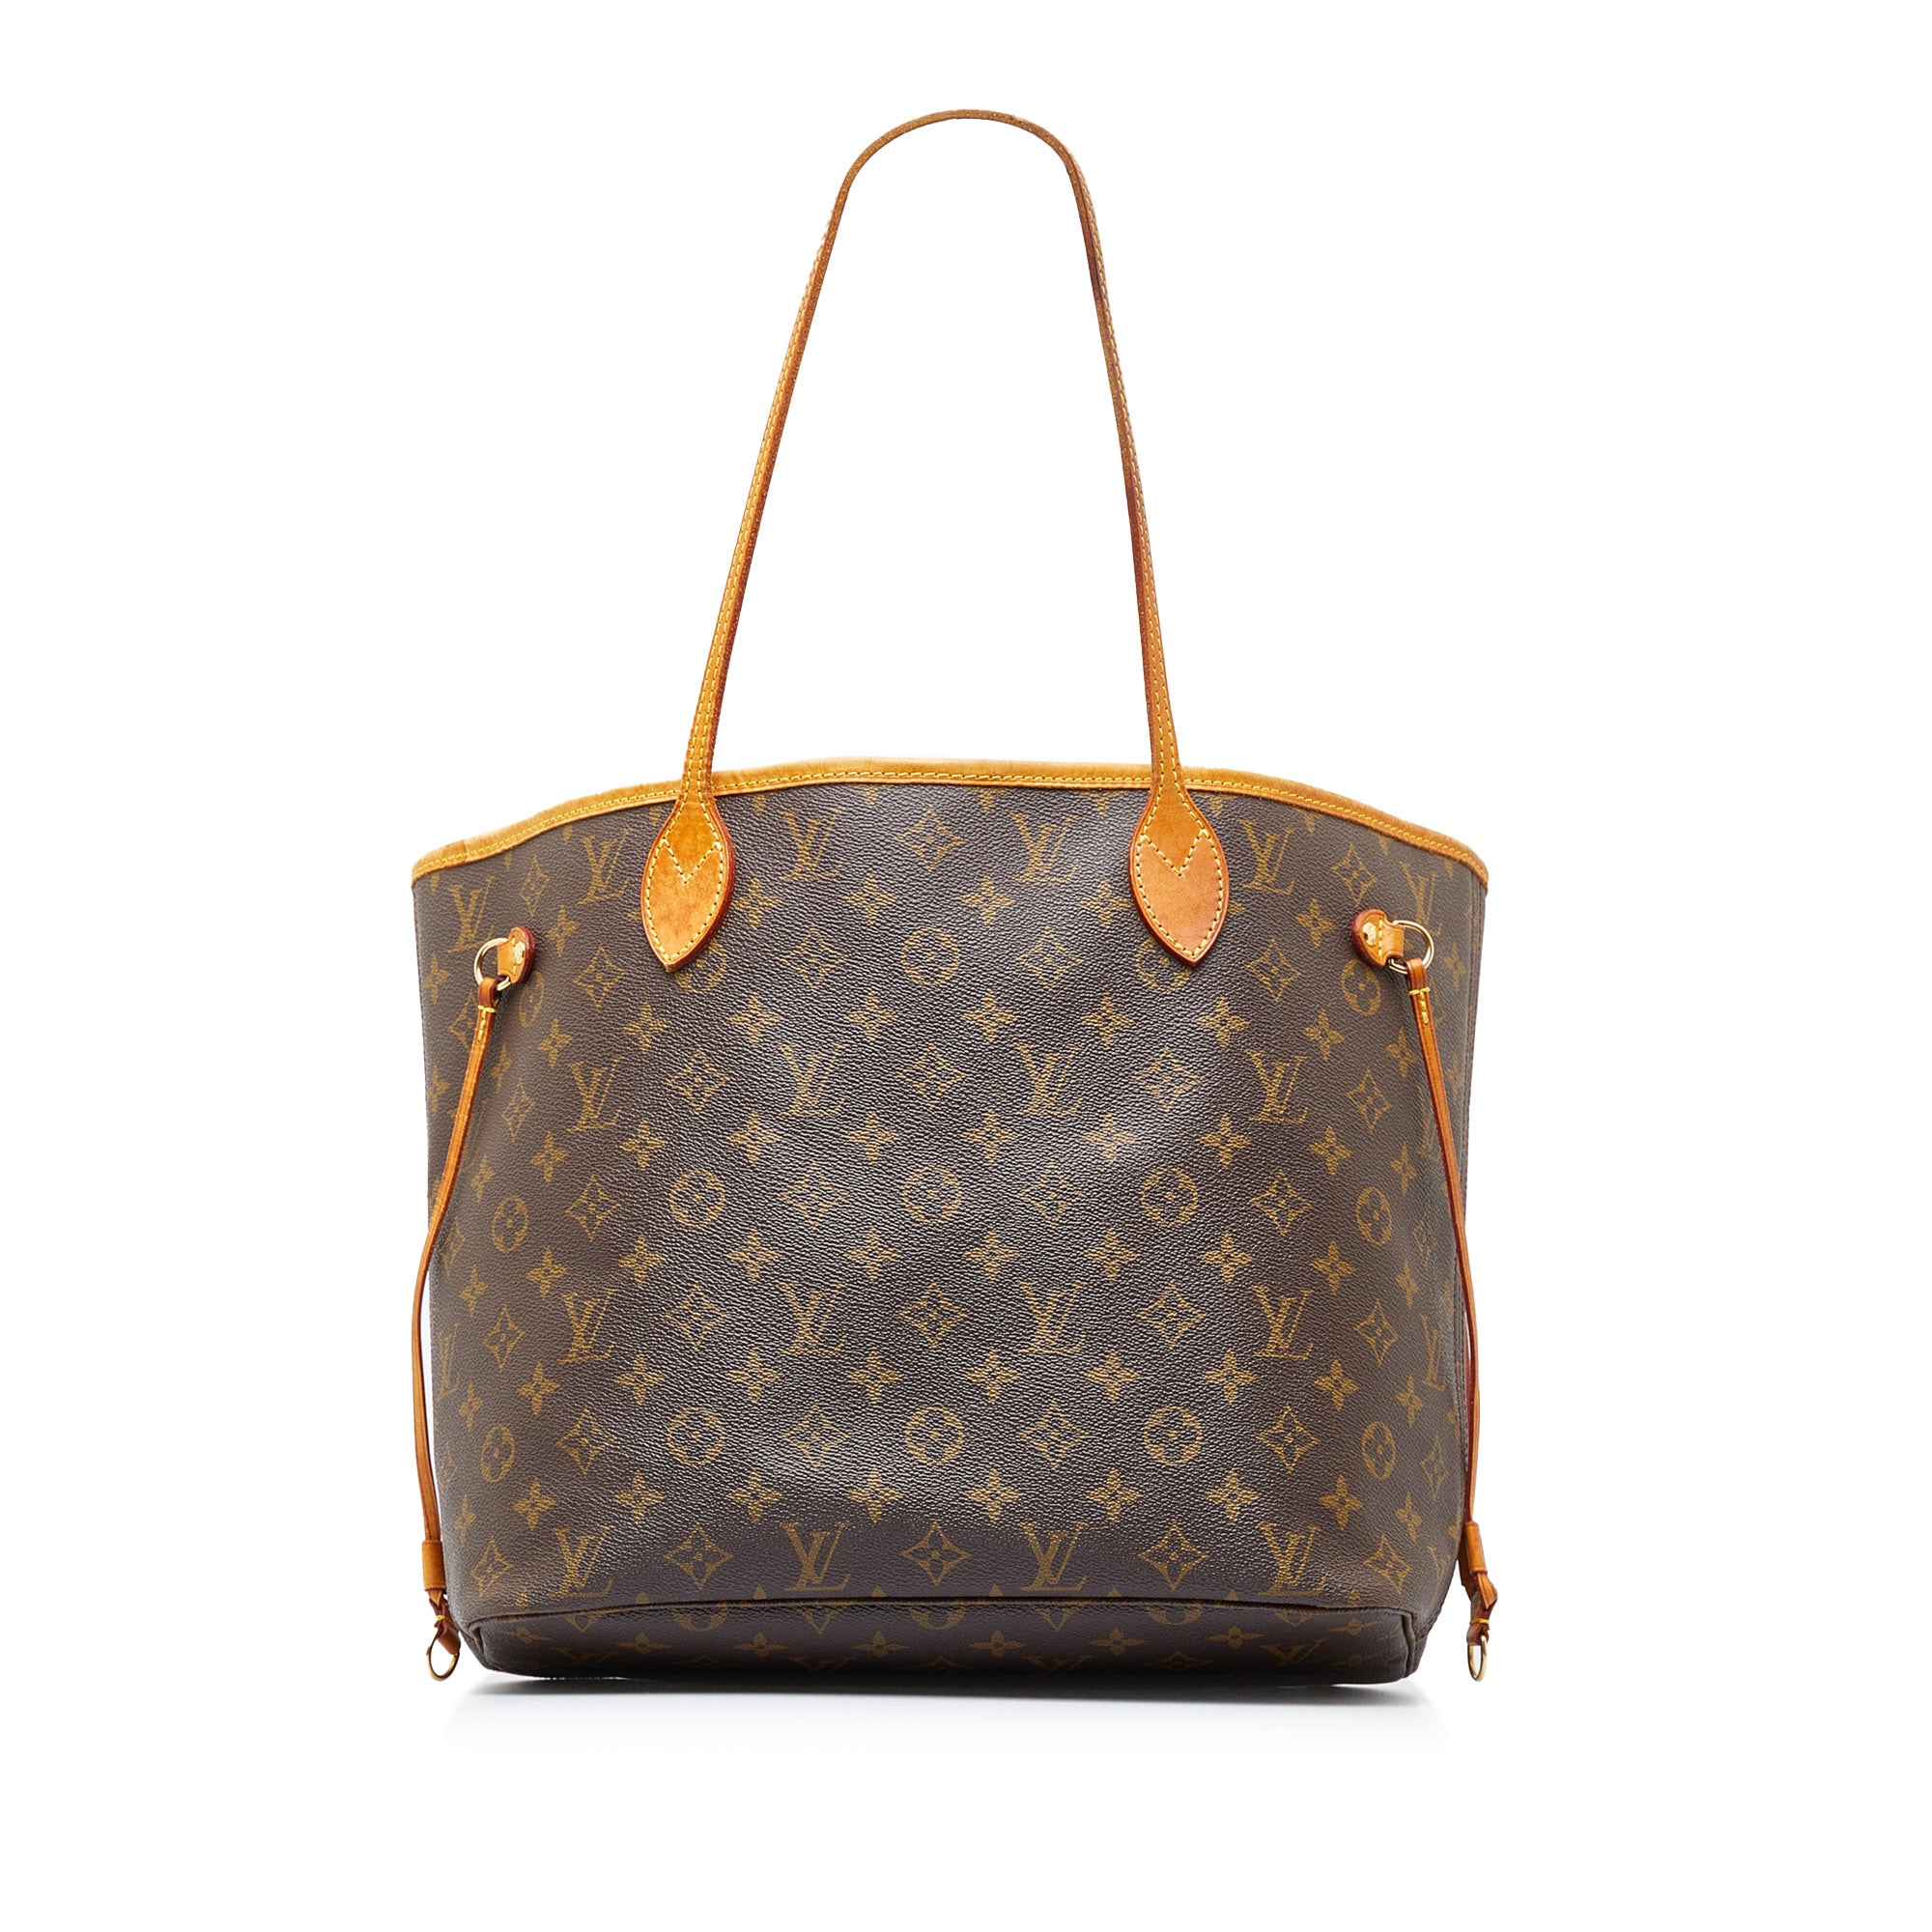 Fashion Look Featuring Louis Vuitton Satchels & Top Handle Bags